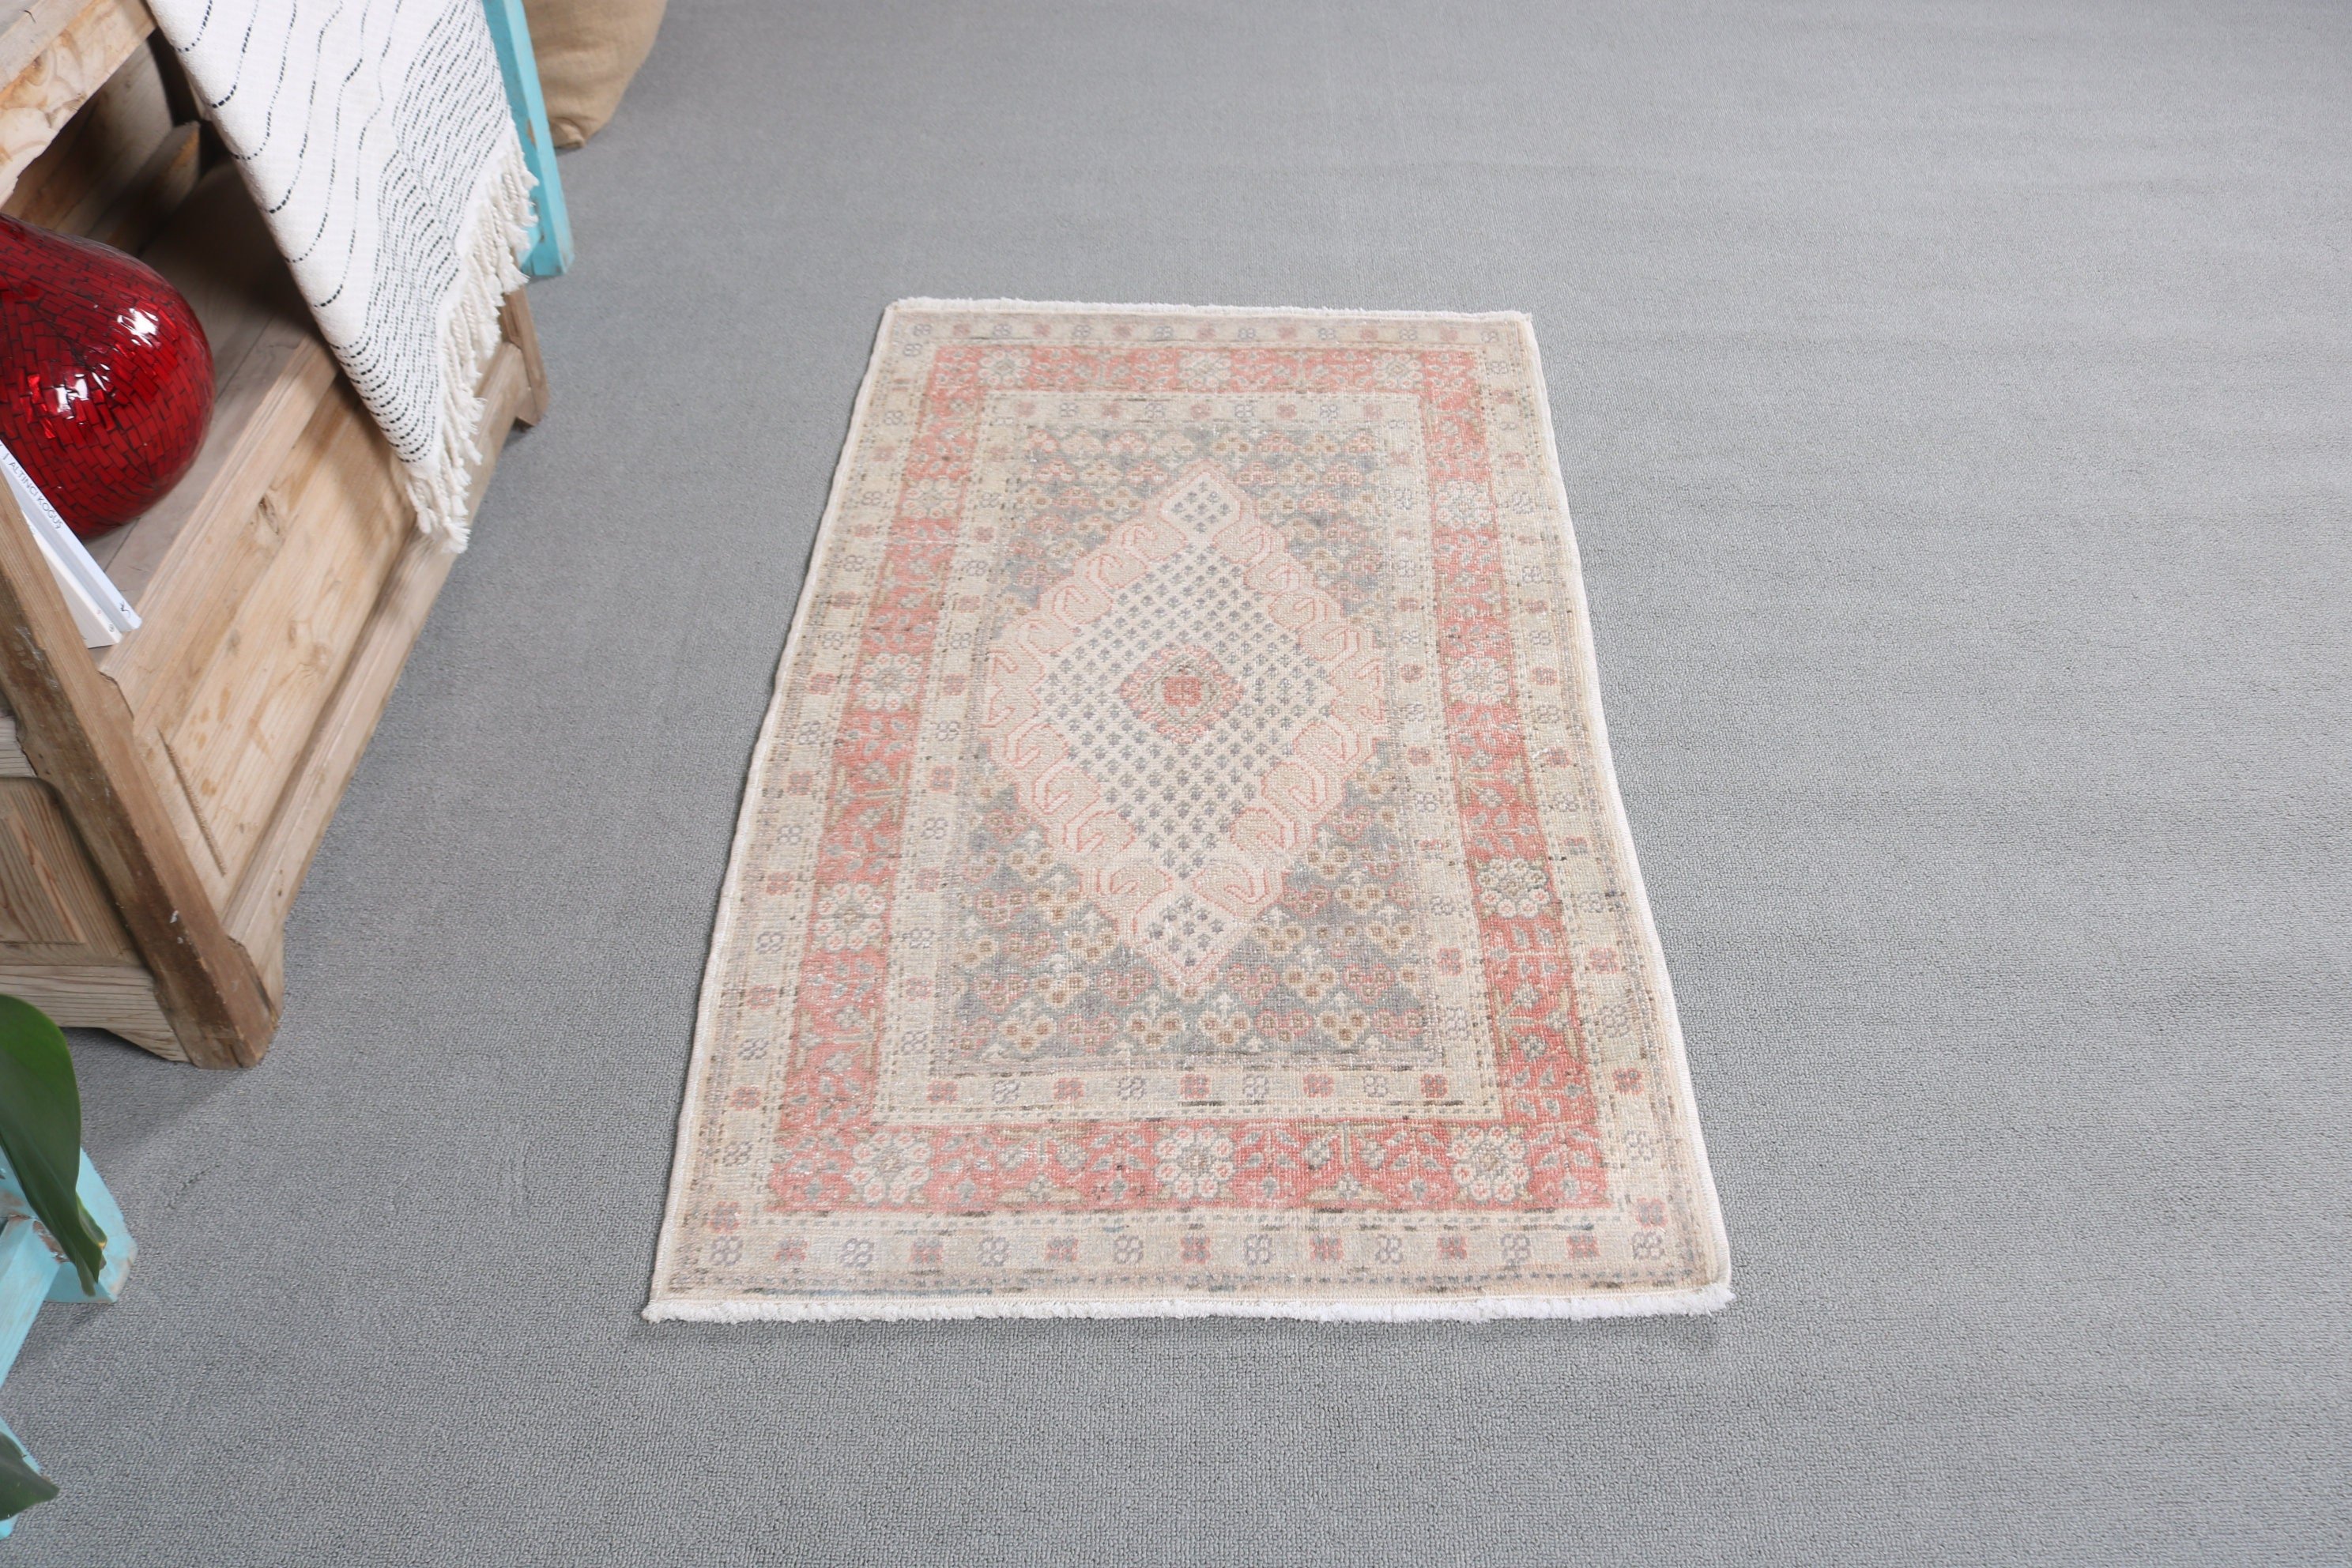 Anatolian Rug, Rugs for Entry, Moroccan Rug, Turkish Rugs, 2.1x3.7 ft Small Rug, Entry Rug, White Moroccan Rugs, Bedroom Rugs, Vintage Rug